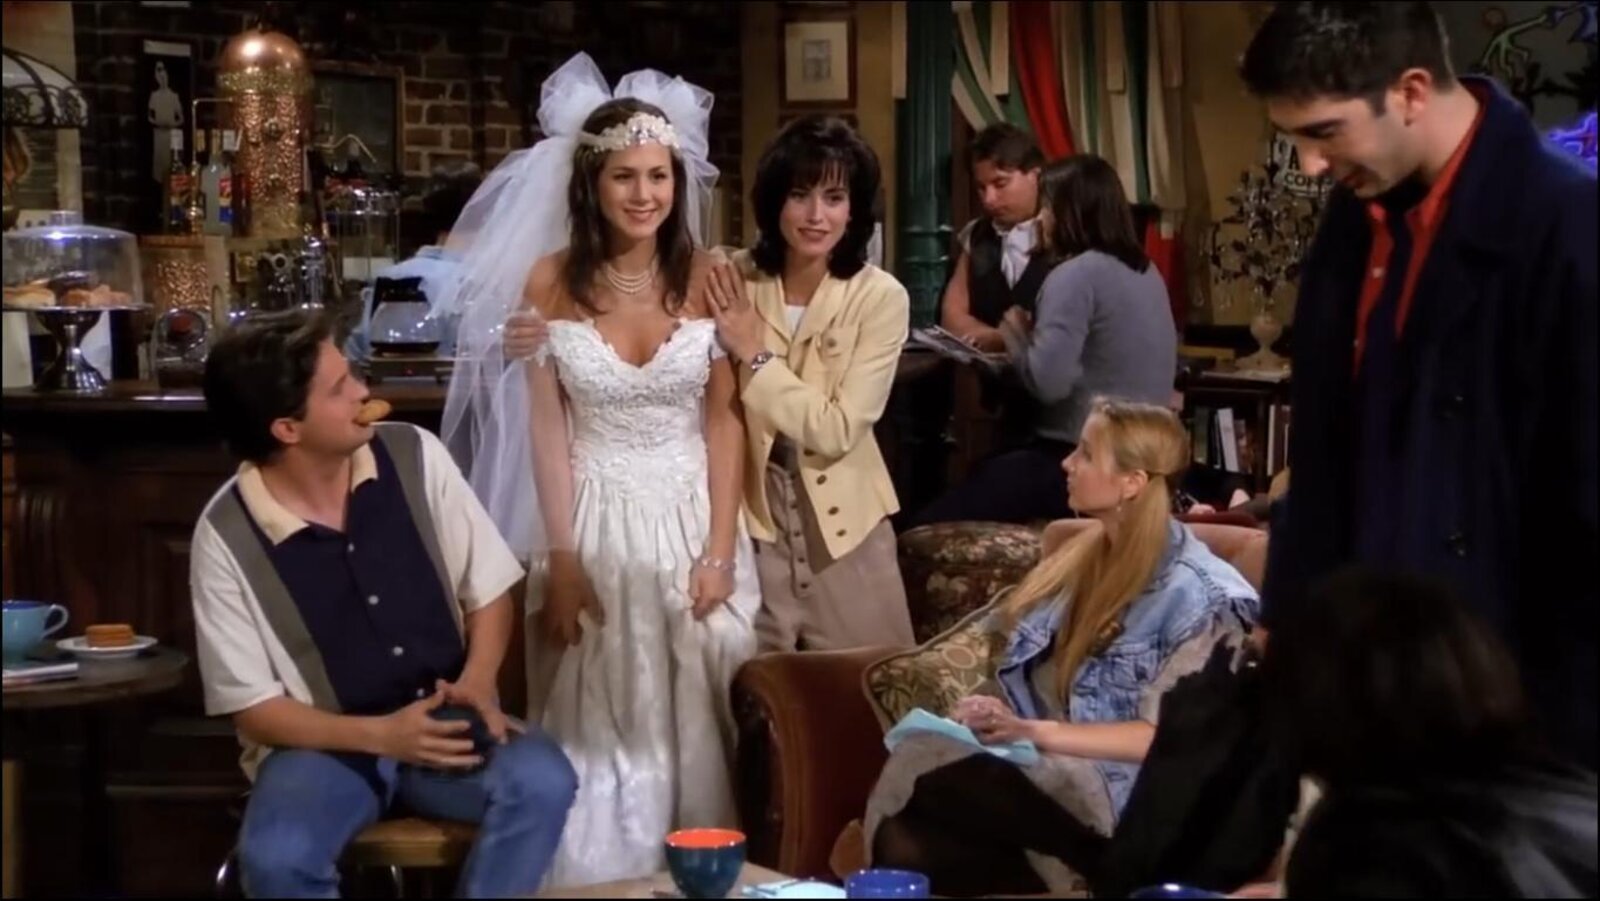 The iconic NBC sitcom 'Friends' has been teasing an HBO Max reunion for months now, but it looks like it's finally making its way into production.